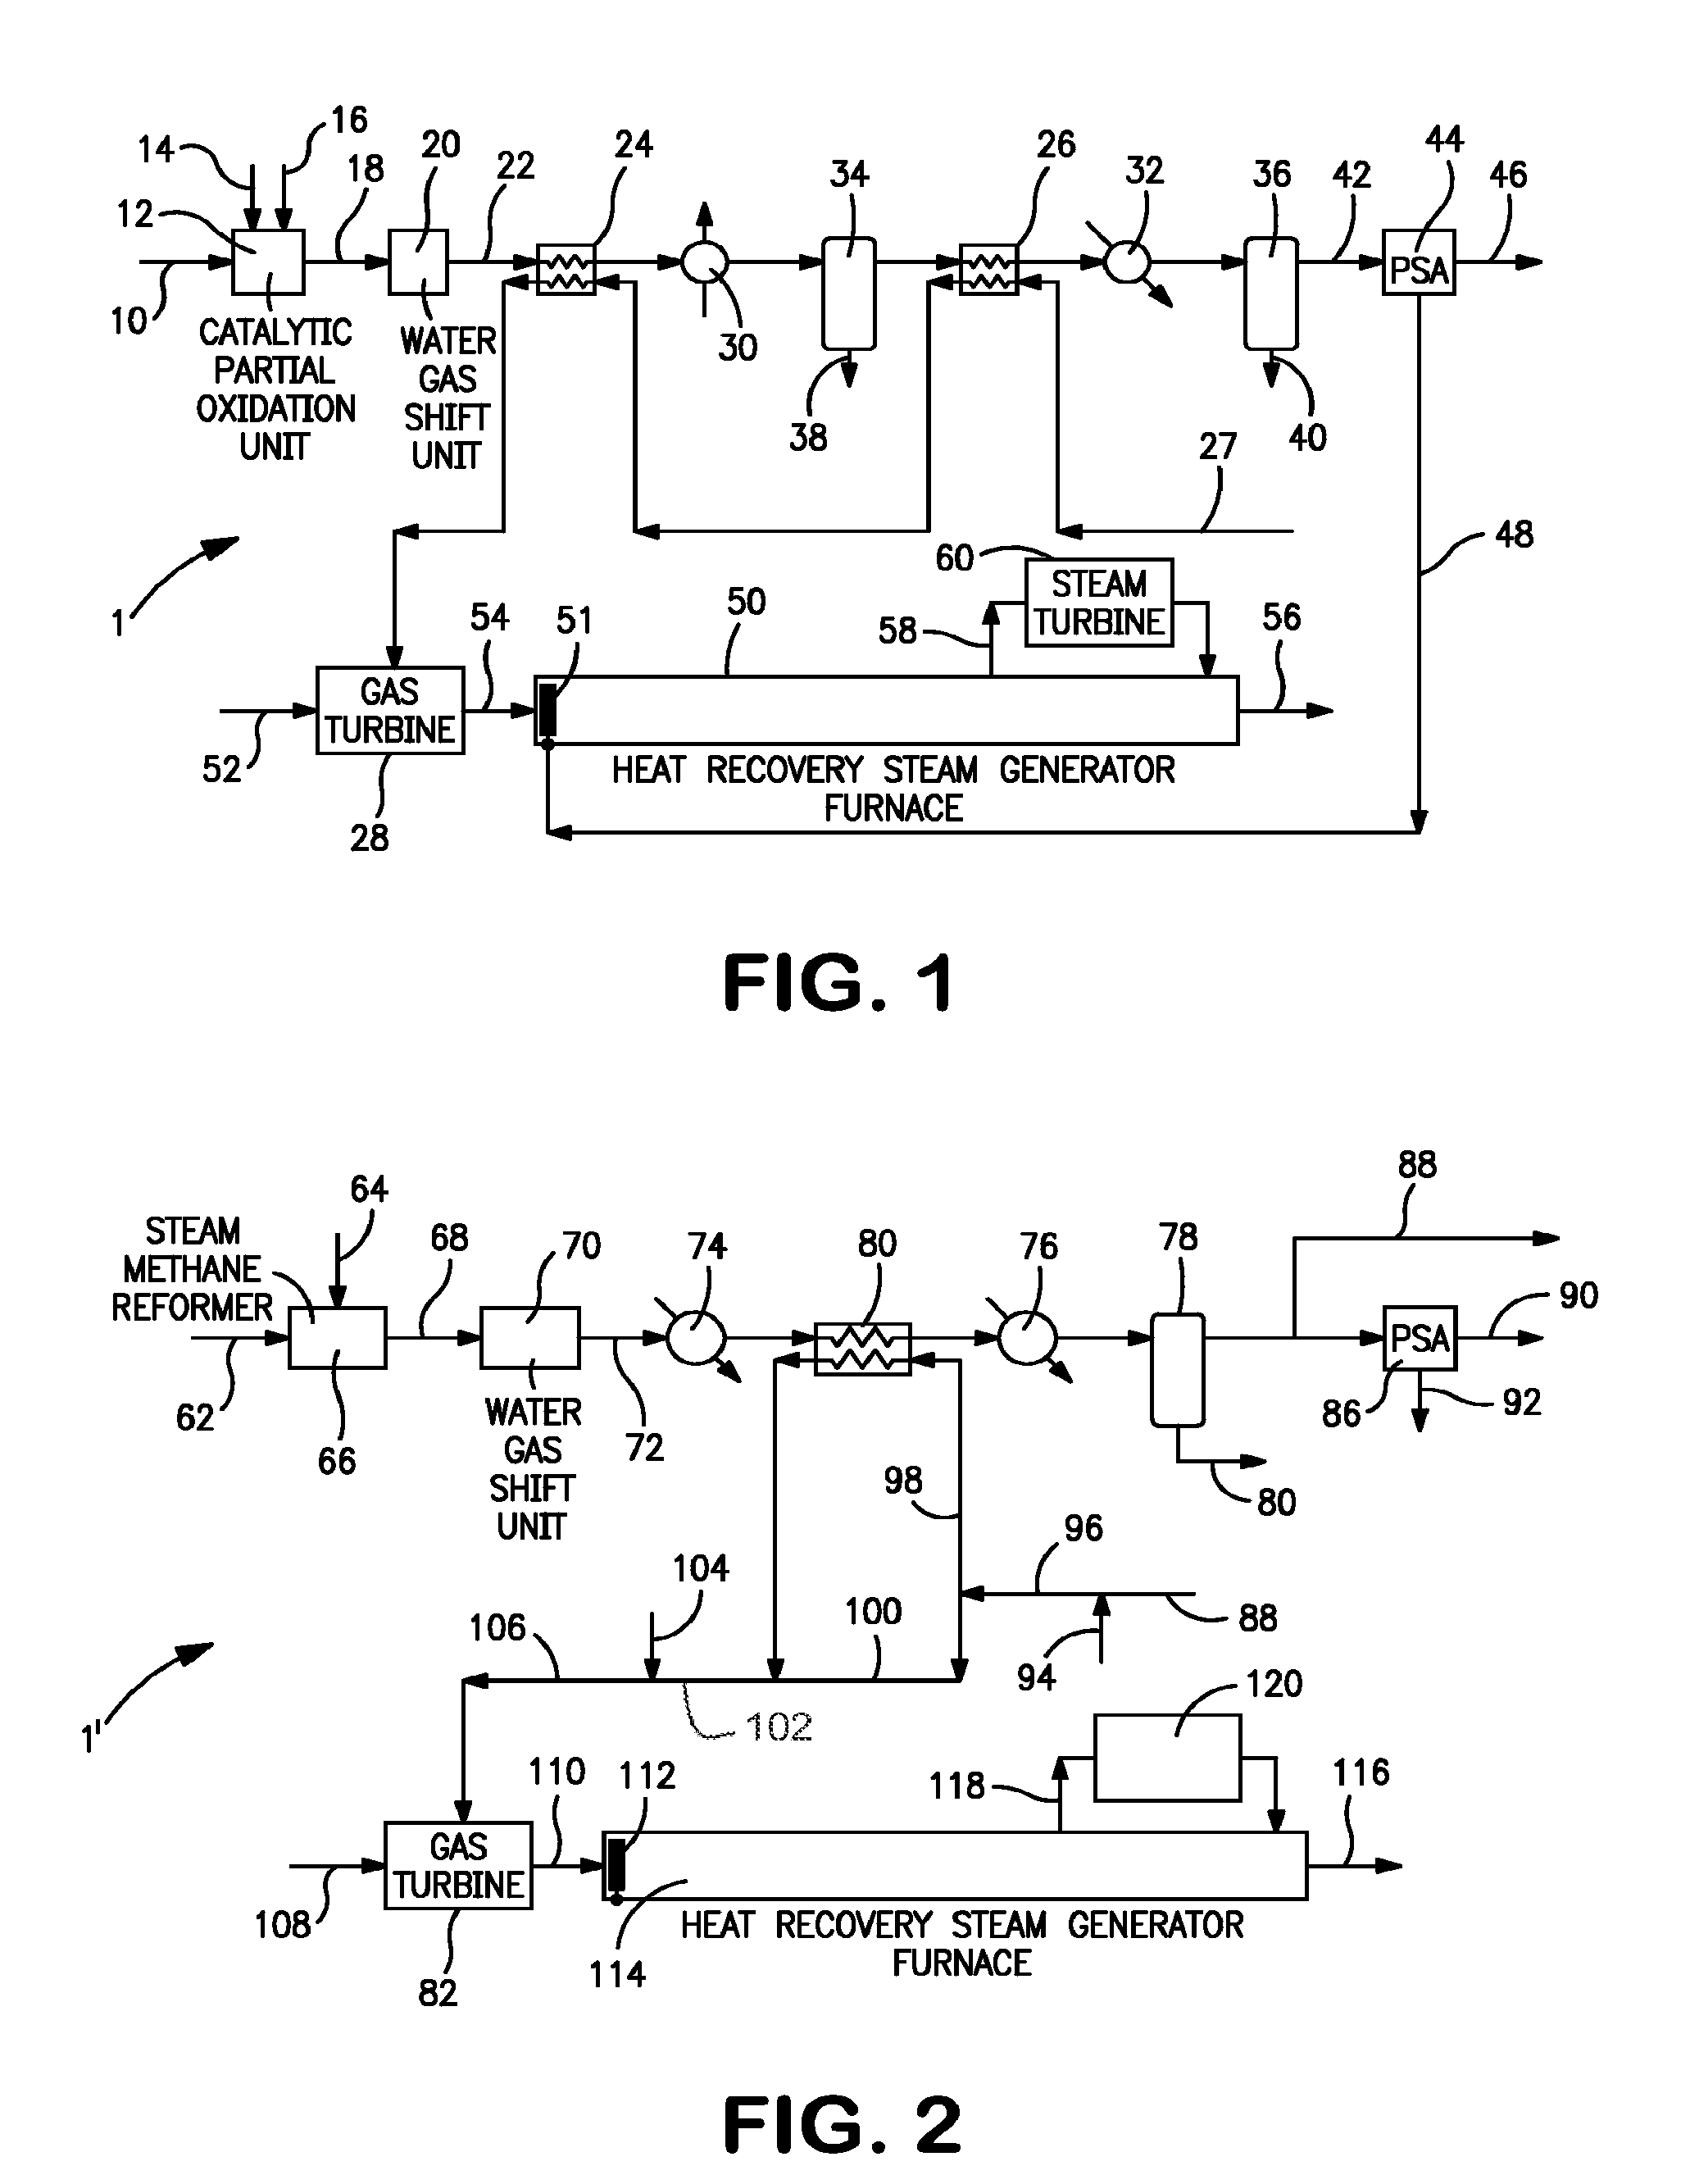 Electricity and synthesis gas generation method